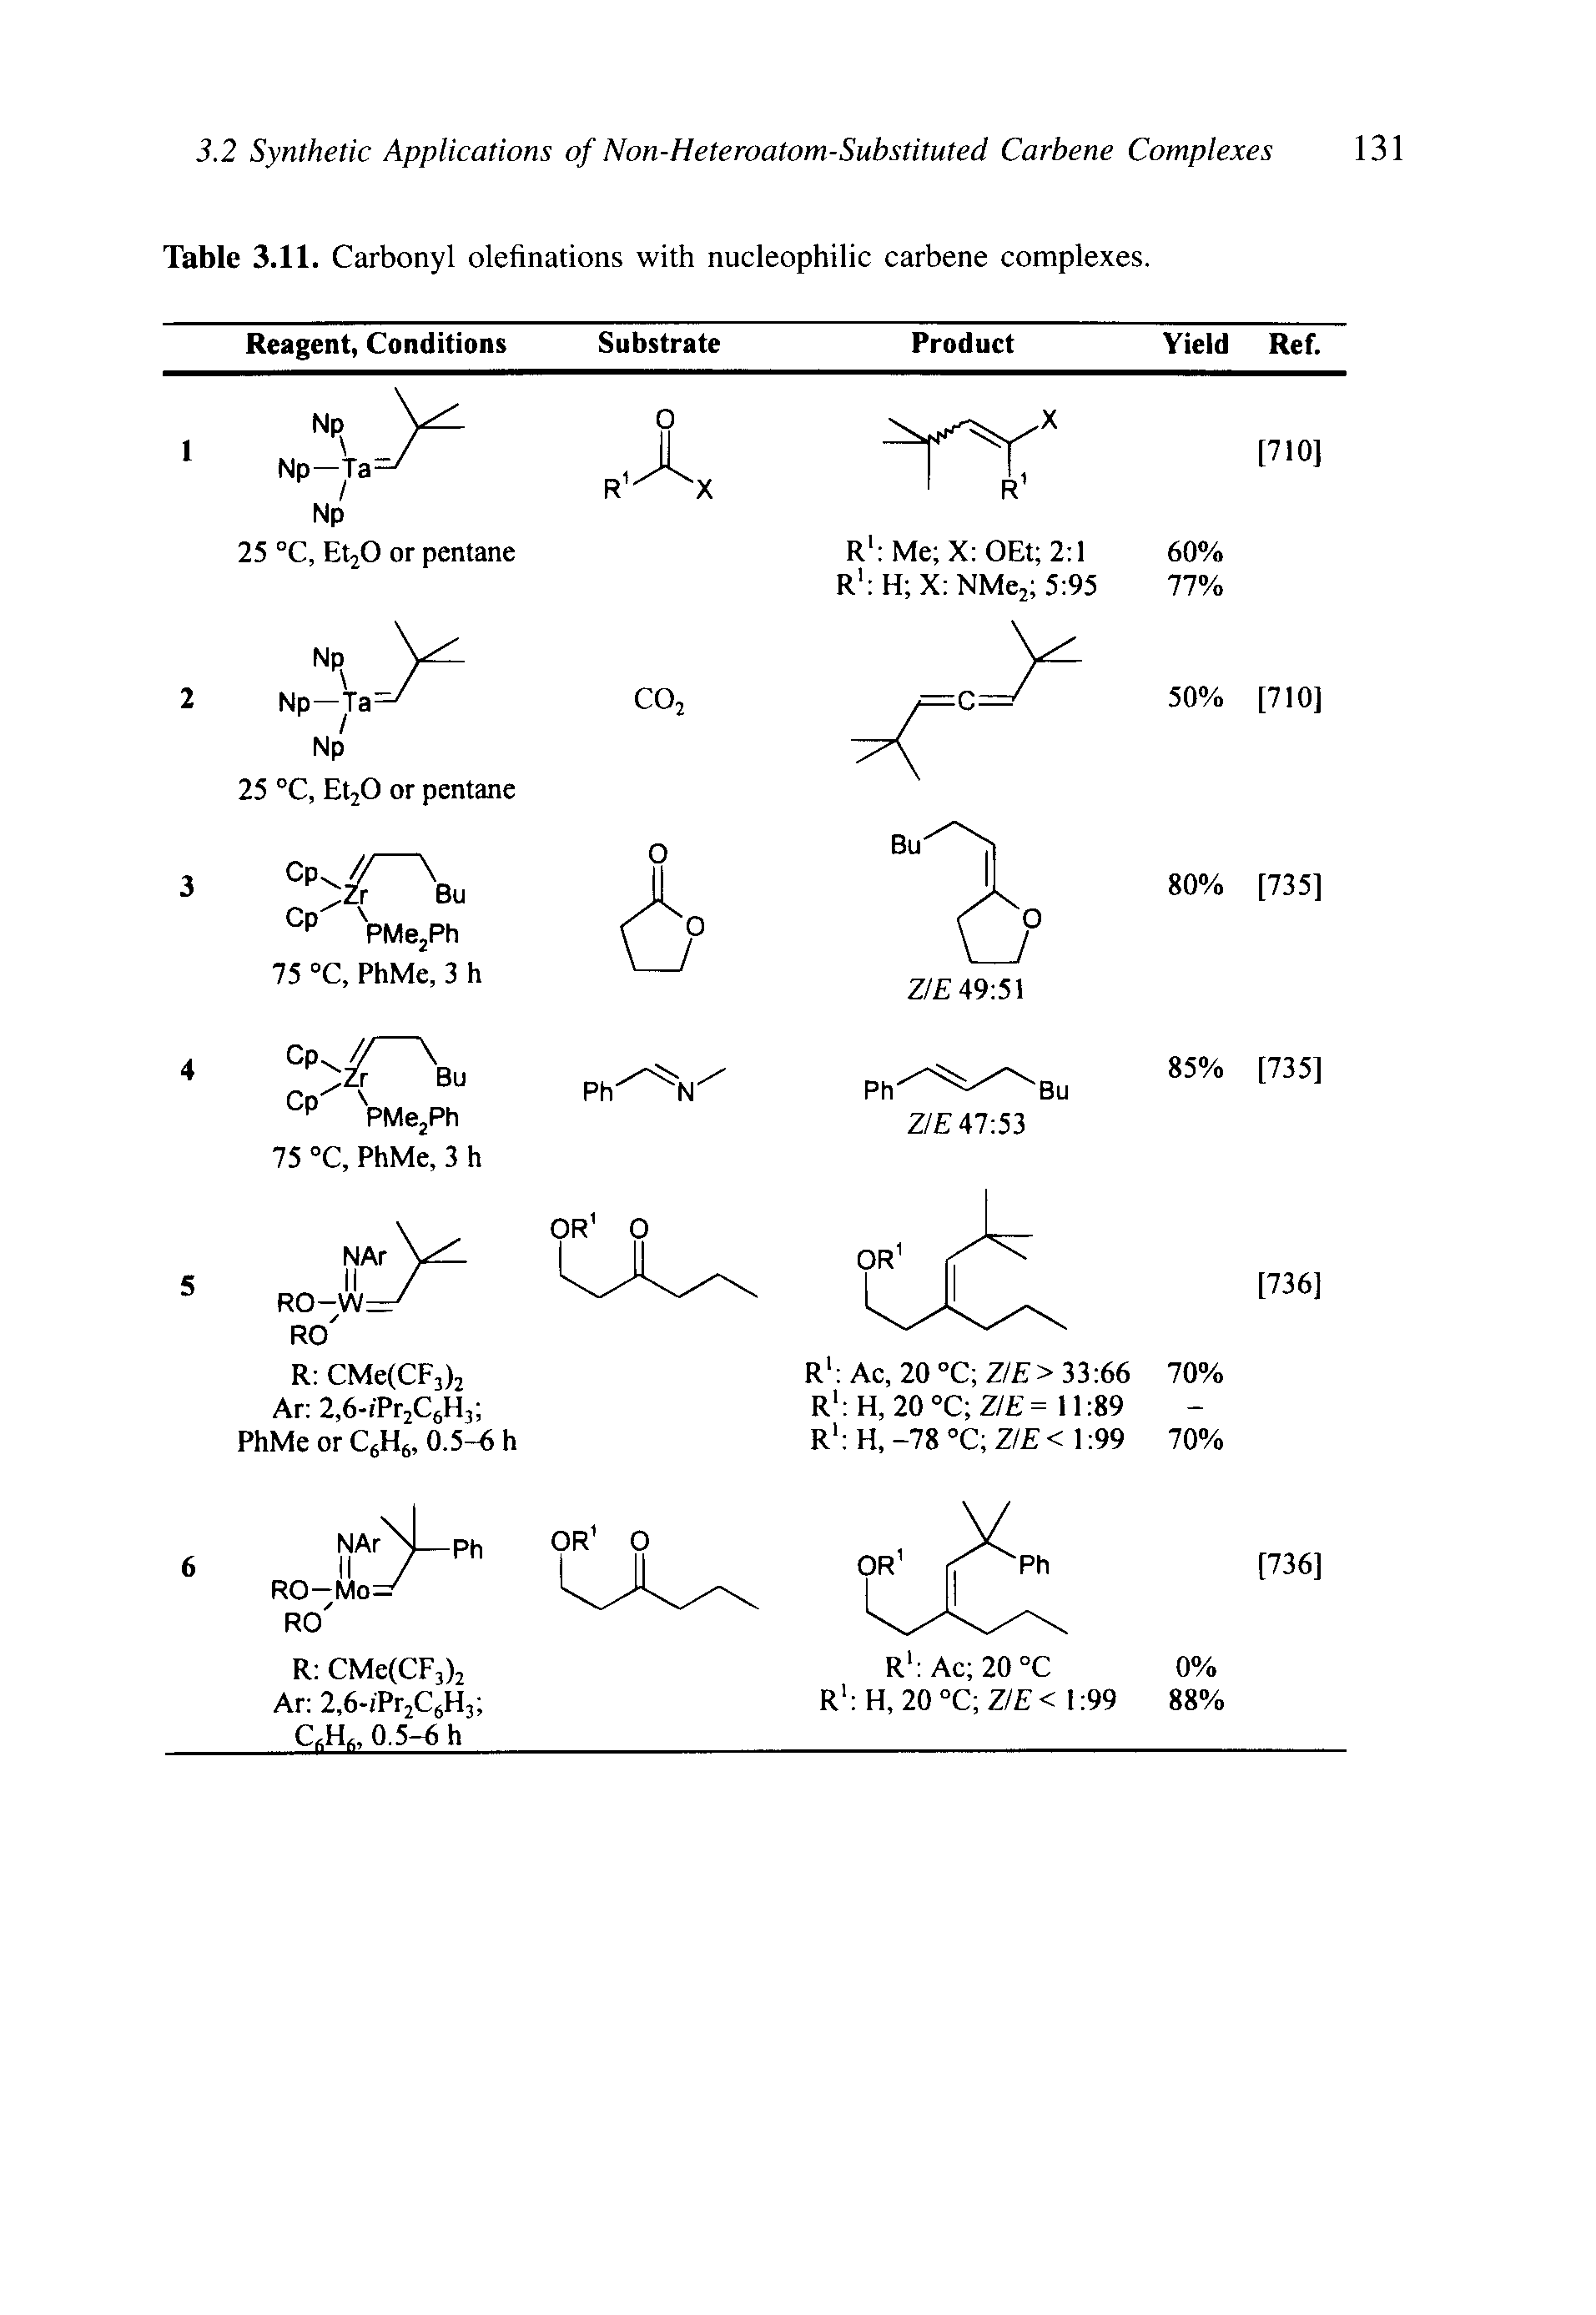 Table 3.11. Carbonyl olefinations with nucleophilic carbene complexes.